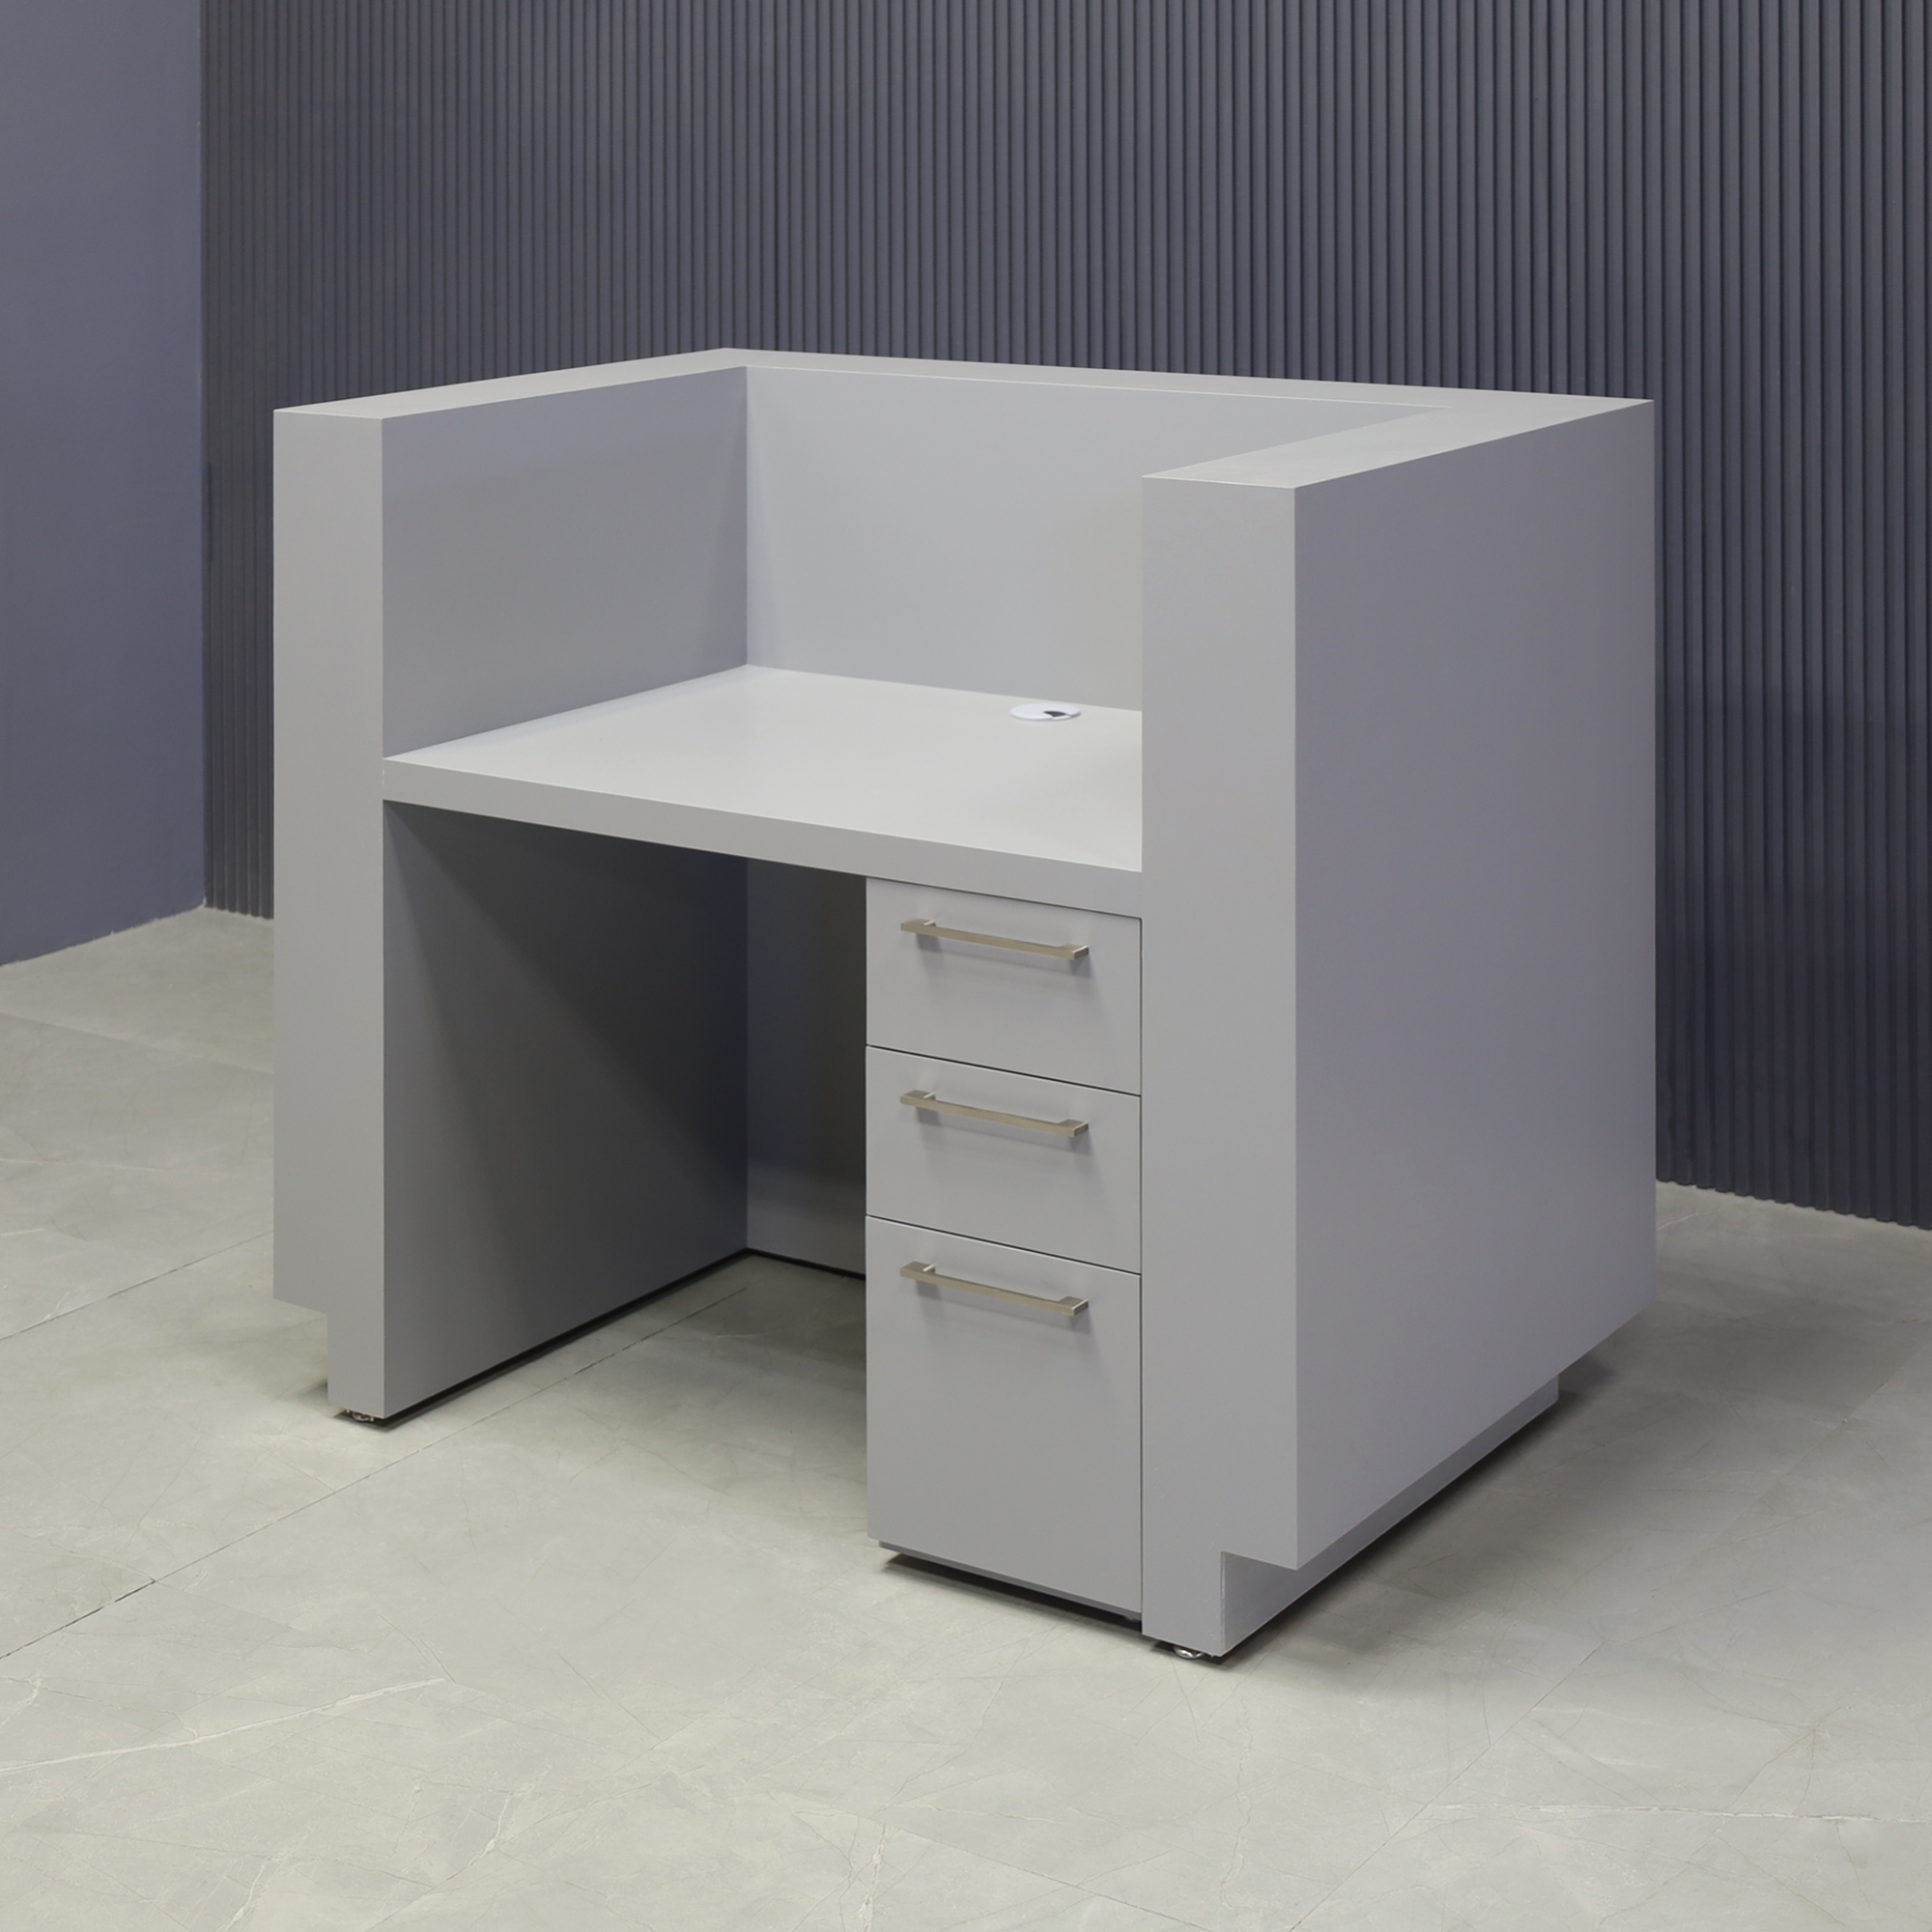 48-inch Dallas U-Shape Reception Desk in fog gray matte laminate main desk and brushed aluminum toe-kick, with built-in storage on right side when sitting, shown here.